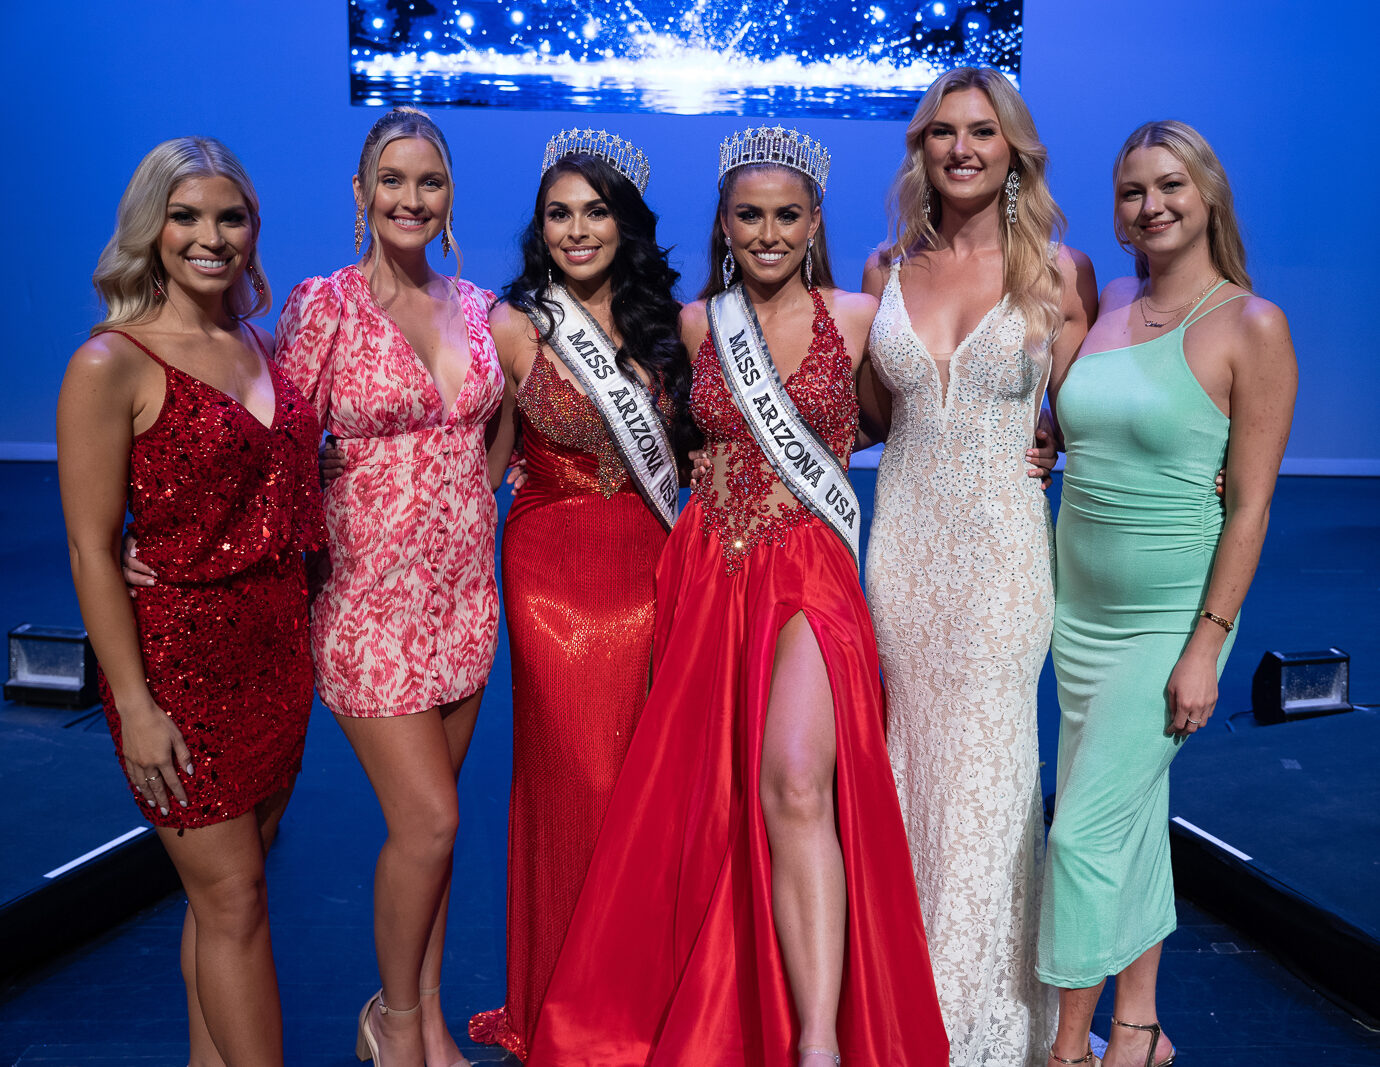 Current and former titleholders at Miss Arizona USA 2021 • Miss Arizona USA 2018 Nicole Smith, Miss Arizona USA 2014 Jordan Wessel, Miss Arizona USA 2020 Yesenia Vidales, Miss Arizona USA 2021 Cassidy Jo Jacks, Miss Arizona USA 2019 Savannah Wix, Miss Arizona USA 2016 Chelsea Myers